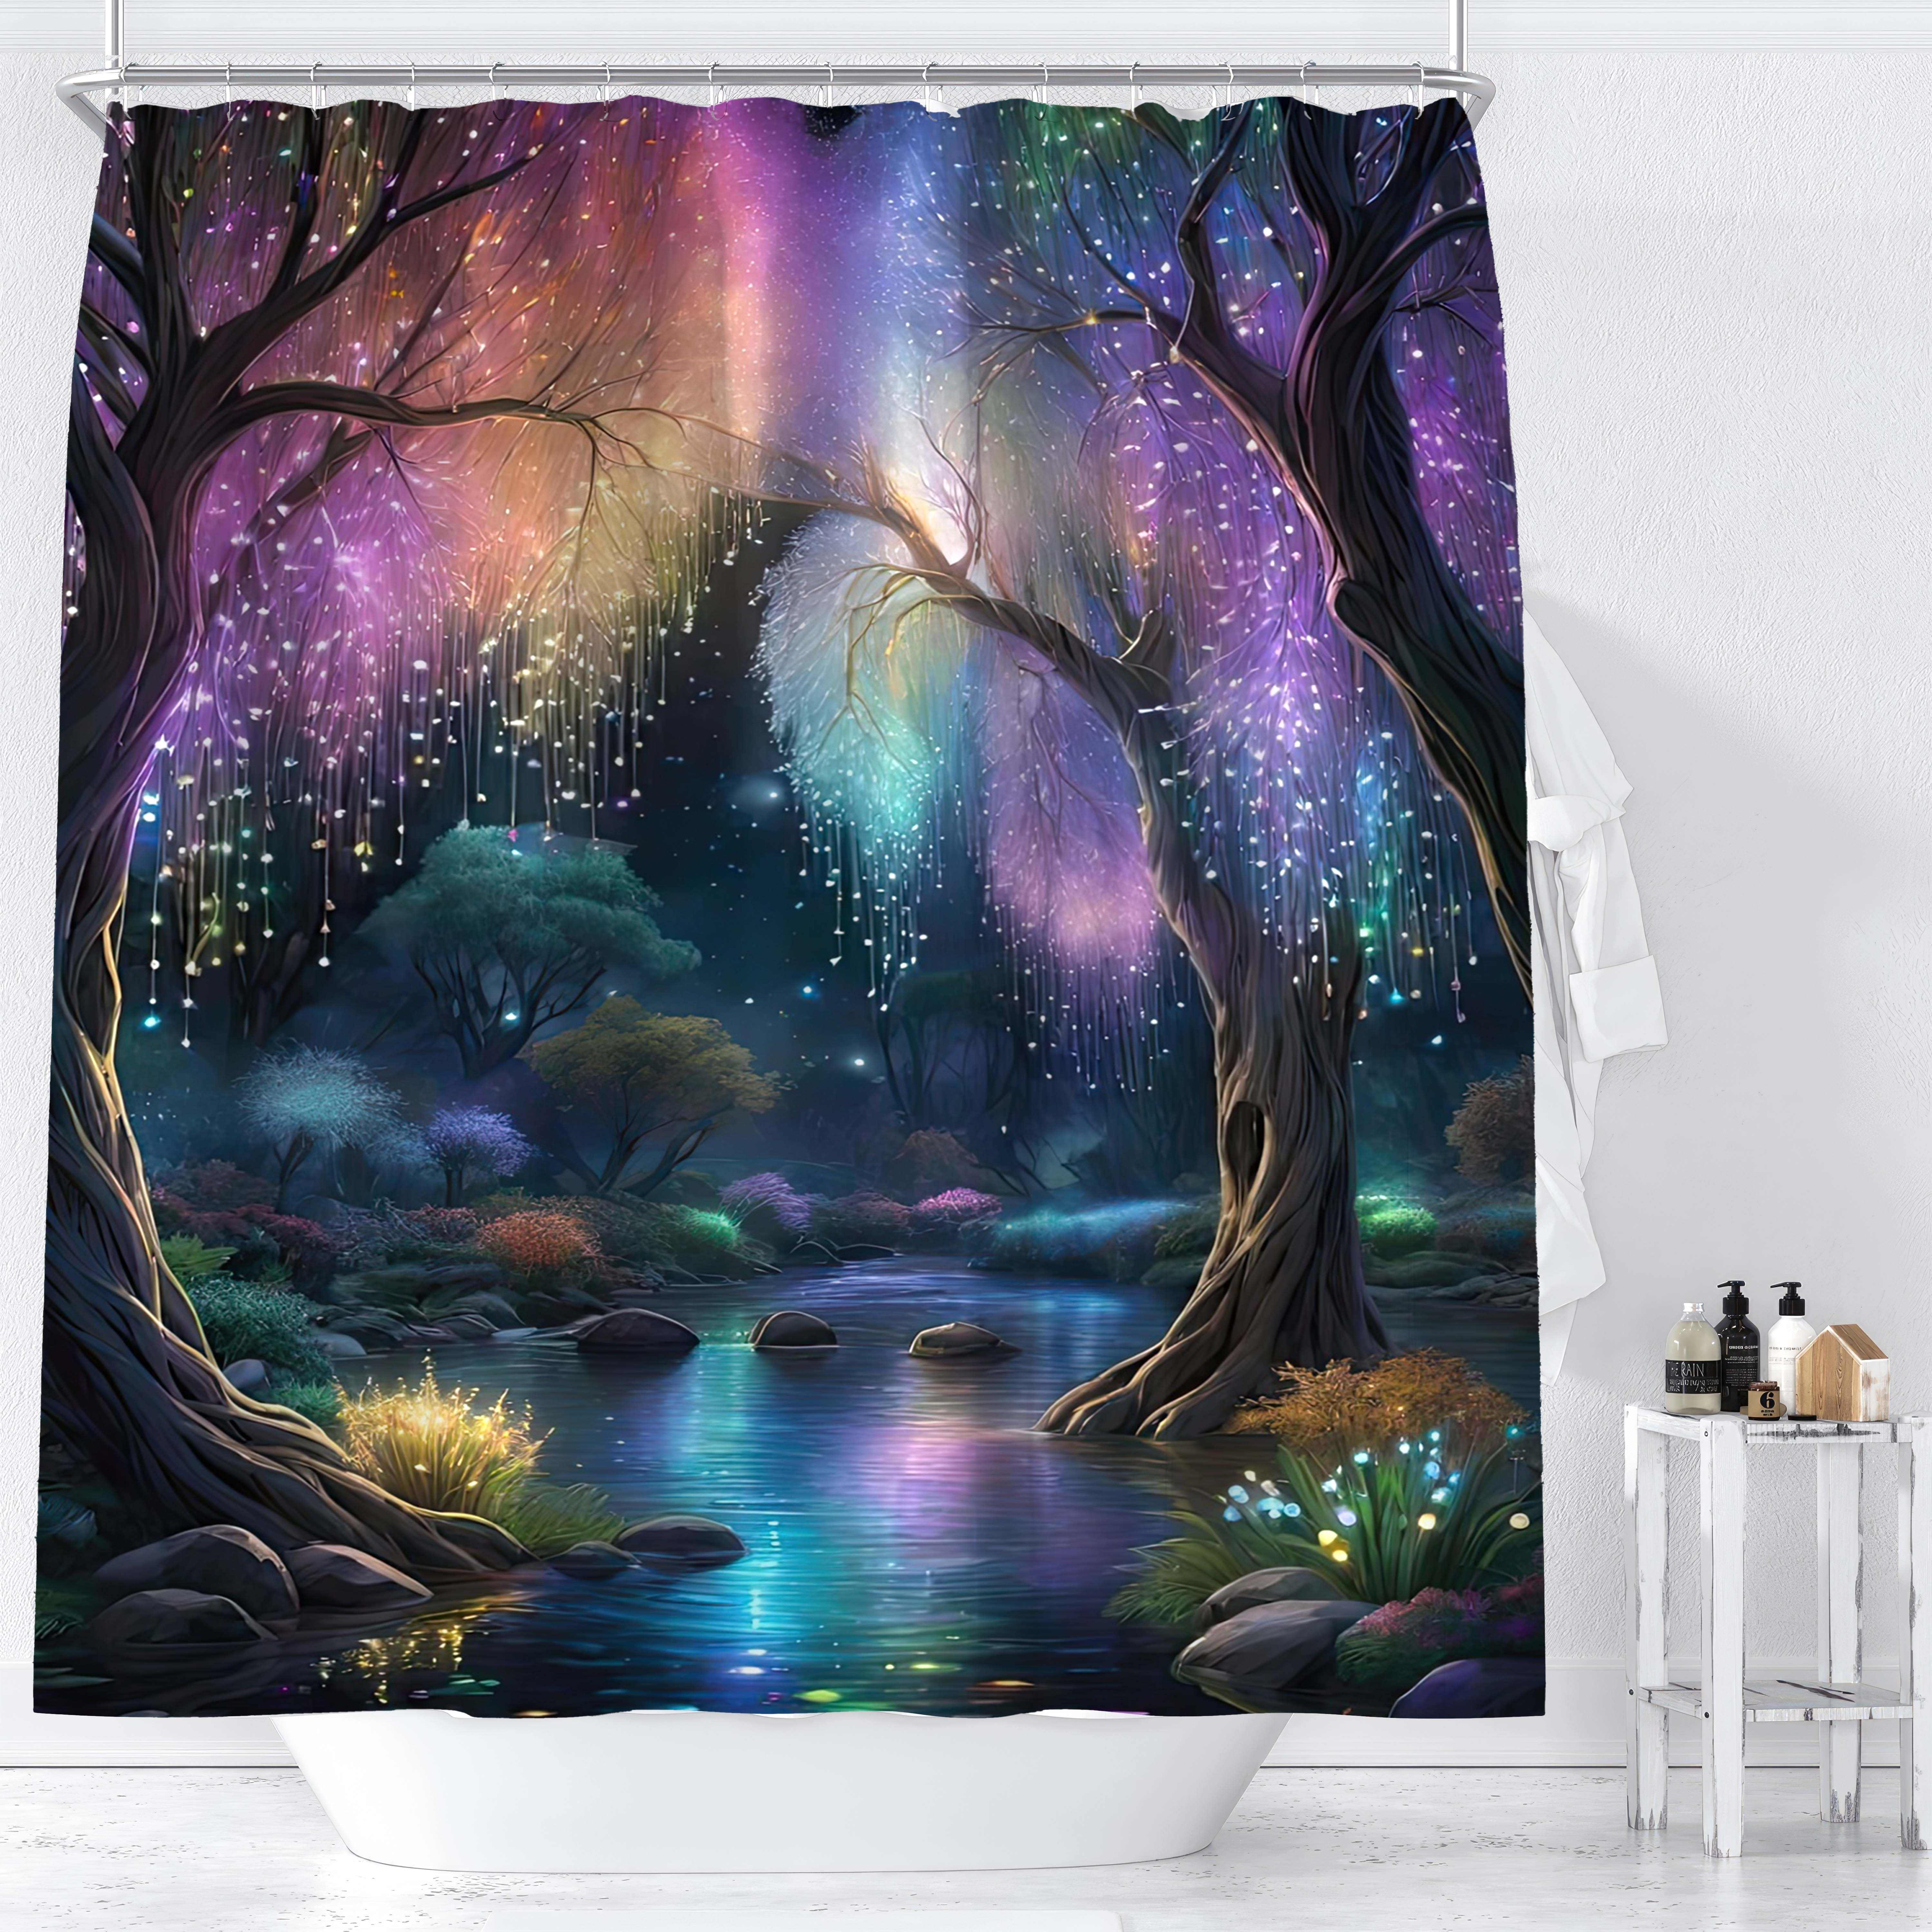 

1pc, Forest Shower Curtain, Colorful Night Lights Lake Scenery Digital Print, Water-repellent Bathroom Decor